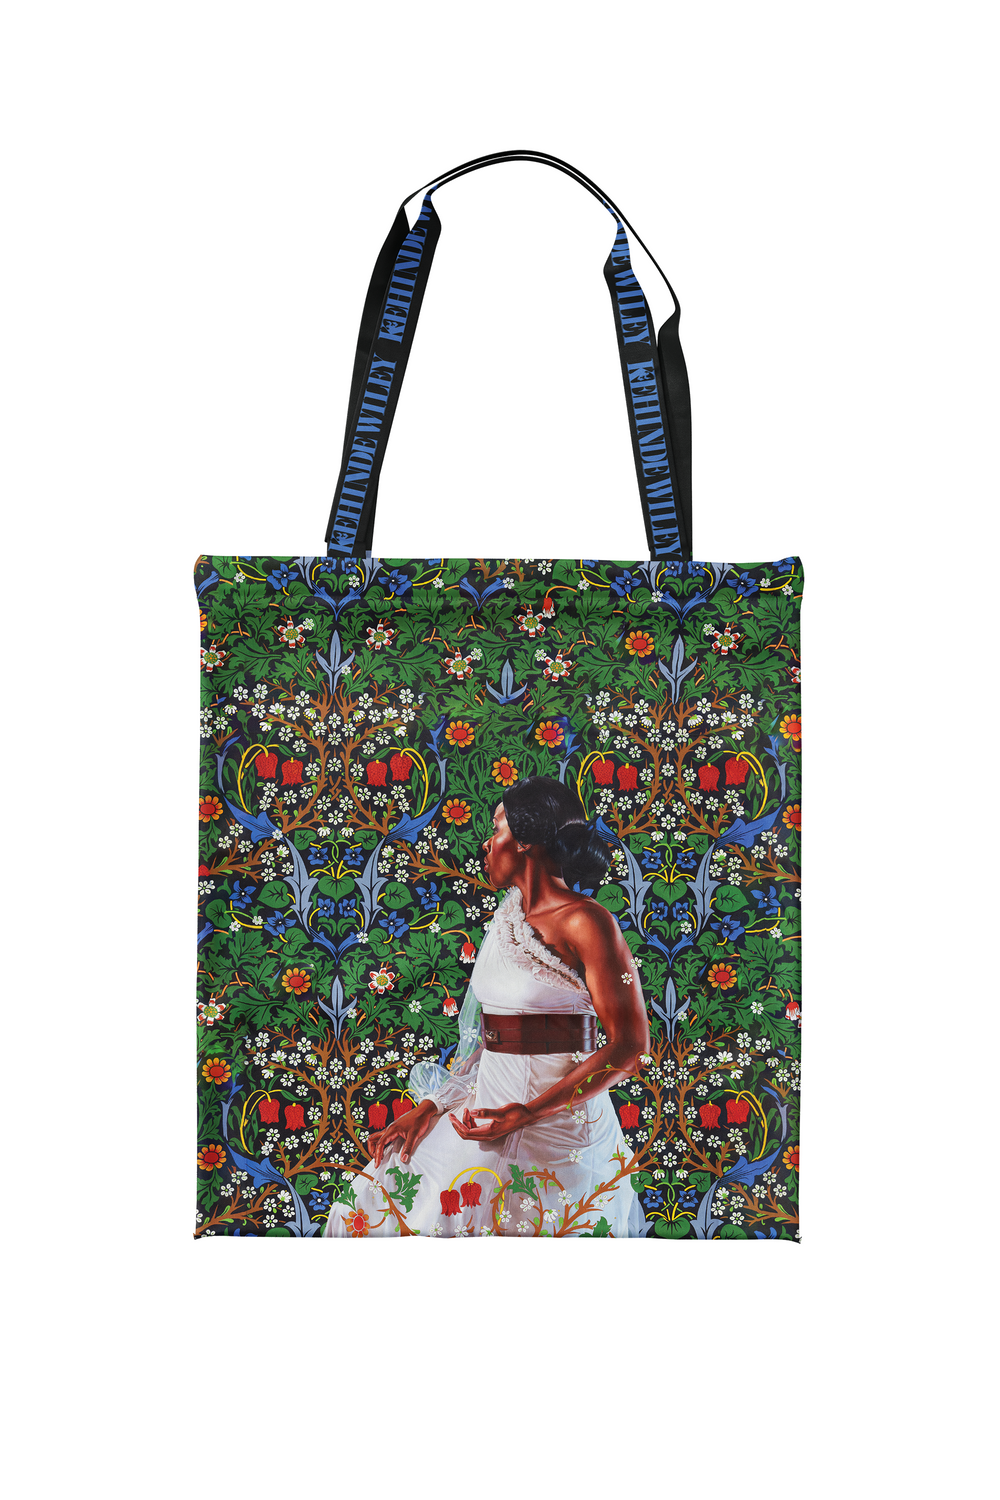 TCS-Wiley Tailormade Cloth Tote Bag India